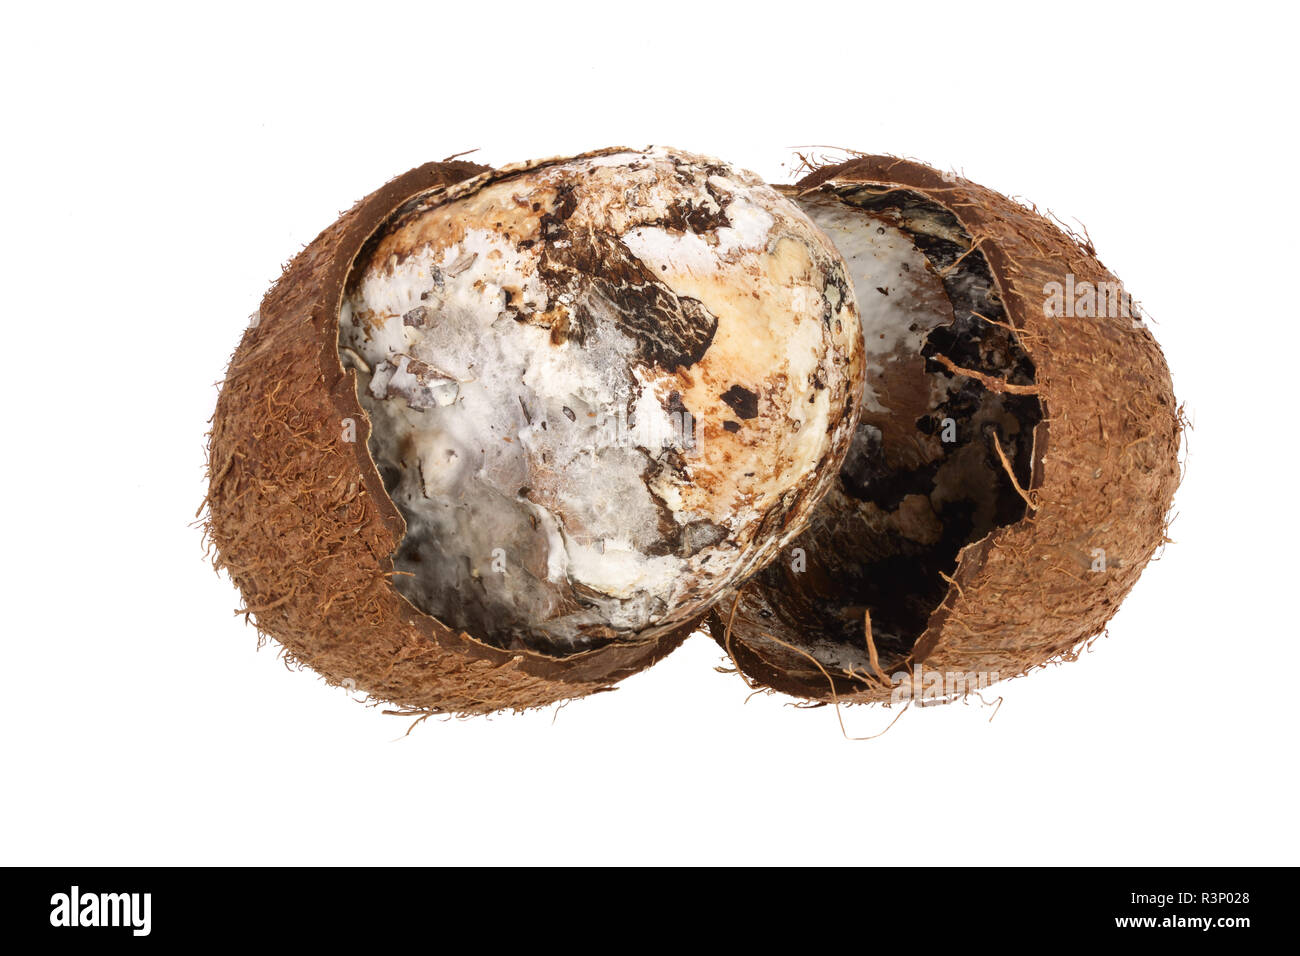 Coconut spoiled with mold isolated on white background. Top view Stock Photo